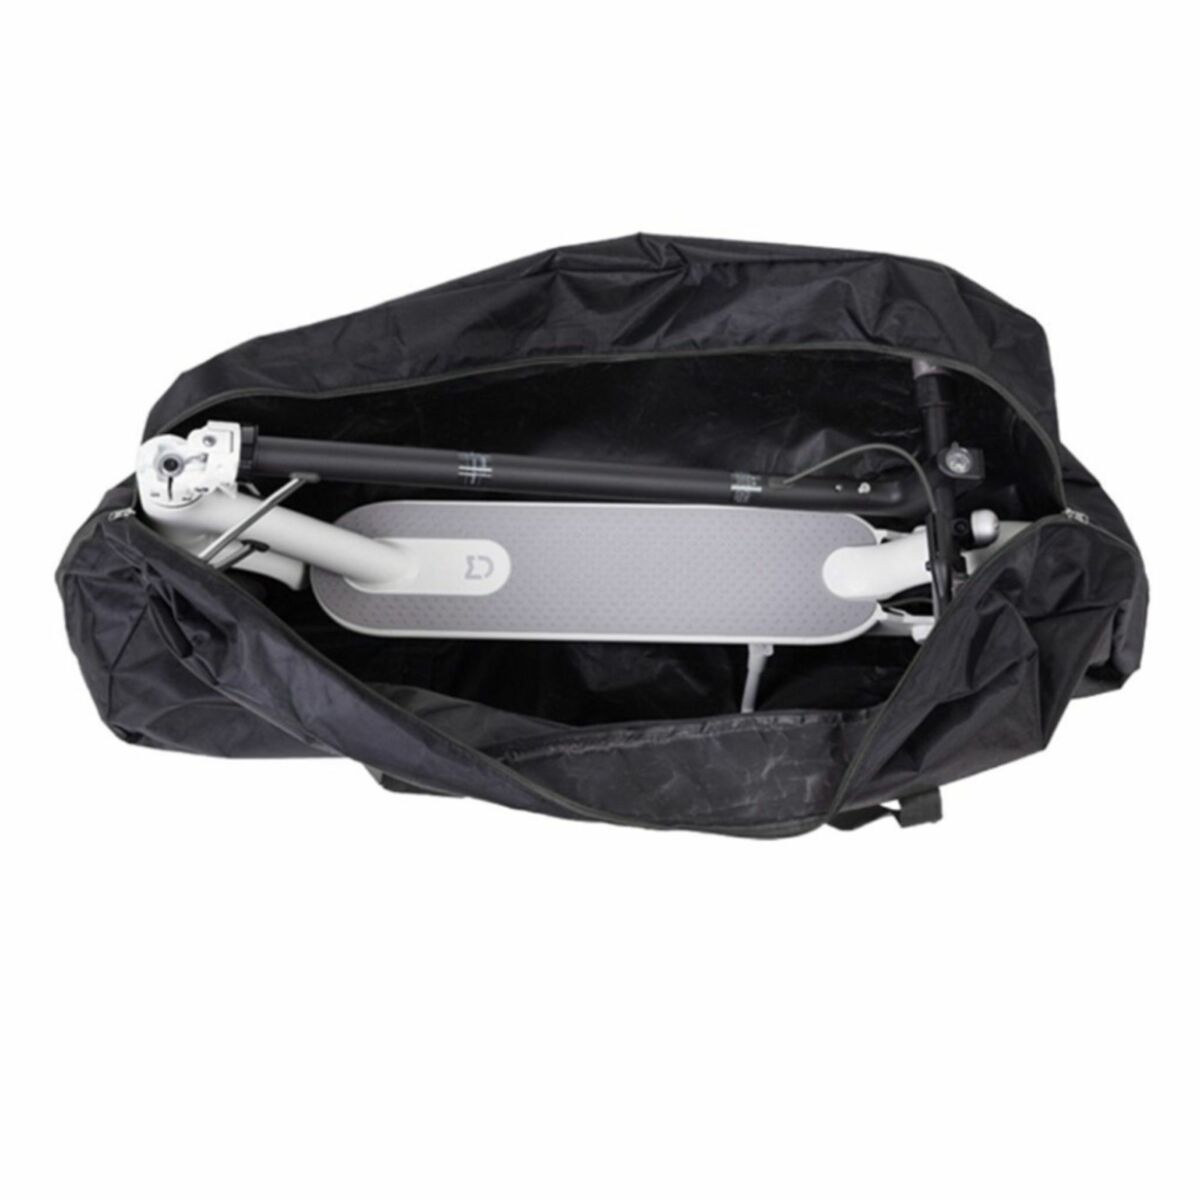 Carry bag WHINCK, WHINCK, Sports and outdoors, Urban mobility, carry-bag-whinck, Brand_WHINCK, category-reference-2609, category-reference-2629, category-reference-2904, category-reference-t-19681, category-reference-t-19756, category-reference-t-19876, category-reference-t-21245, category-reference-t-25387, Condition_NEW, deportista / en forma, Price_20 - 50, RiotNook